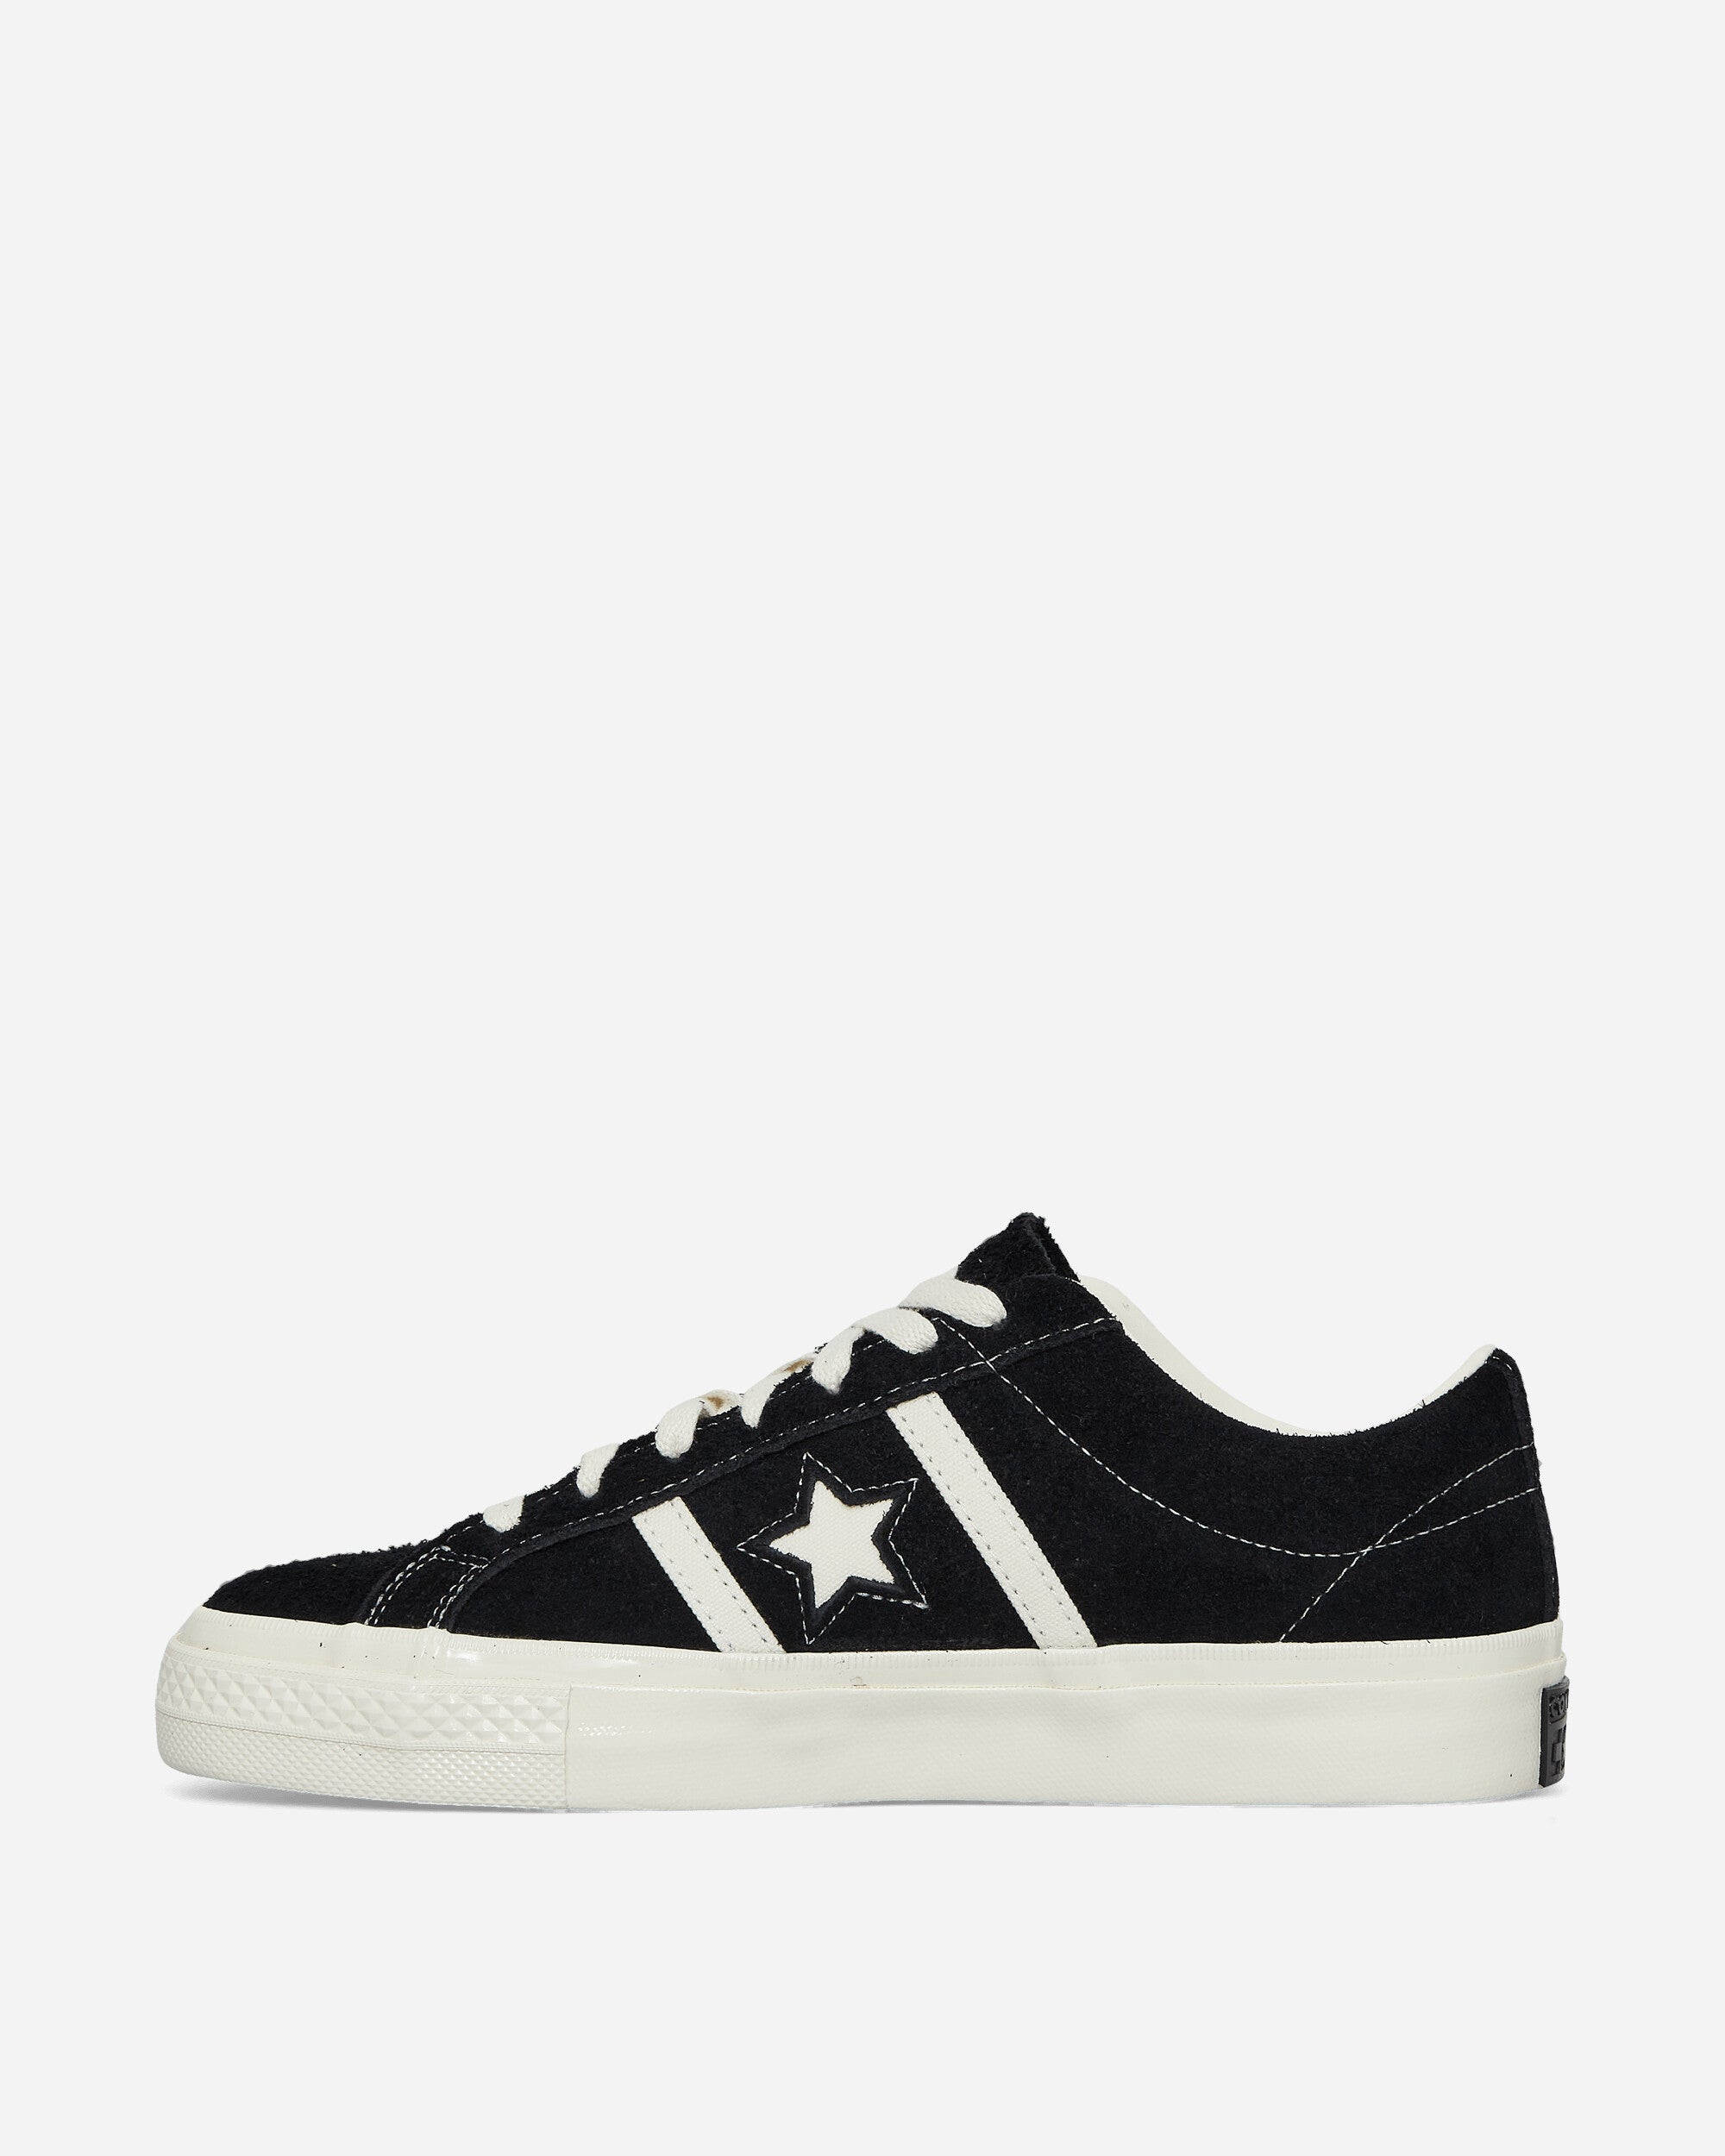 Converse One Star Academy Pro Black/Egret/Egret Sneakers Low A06426C